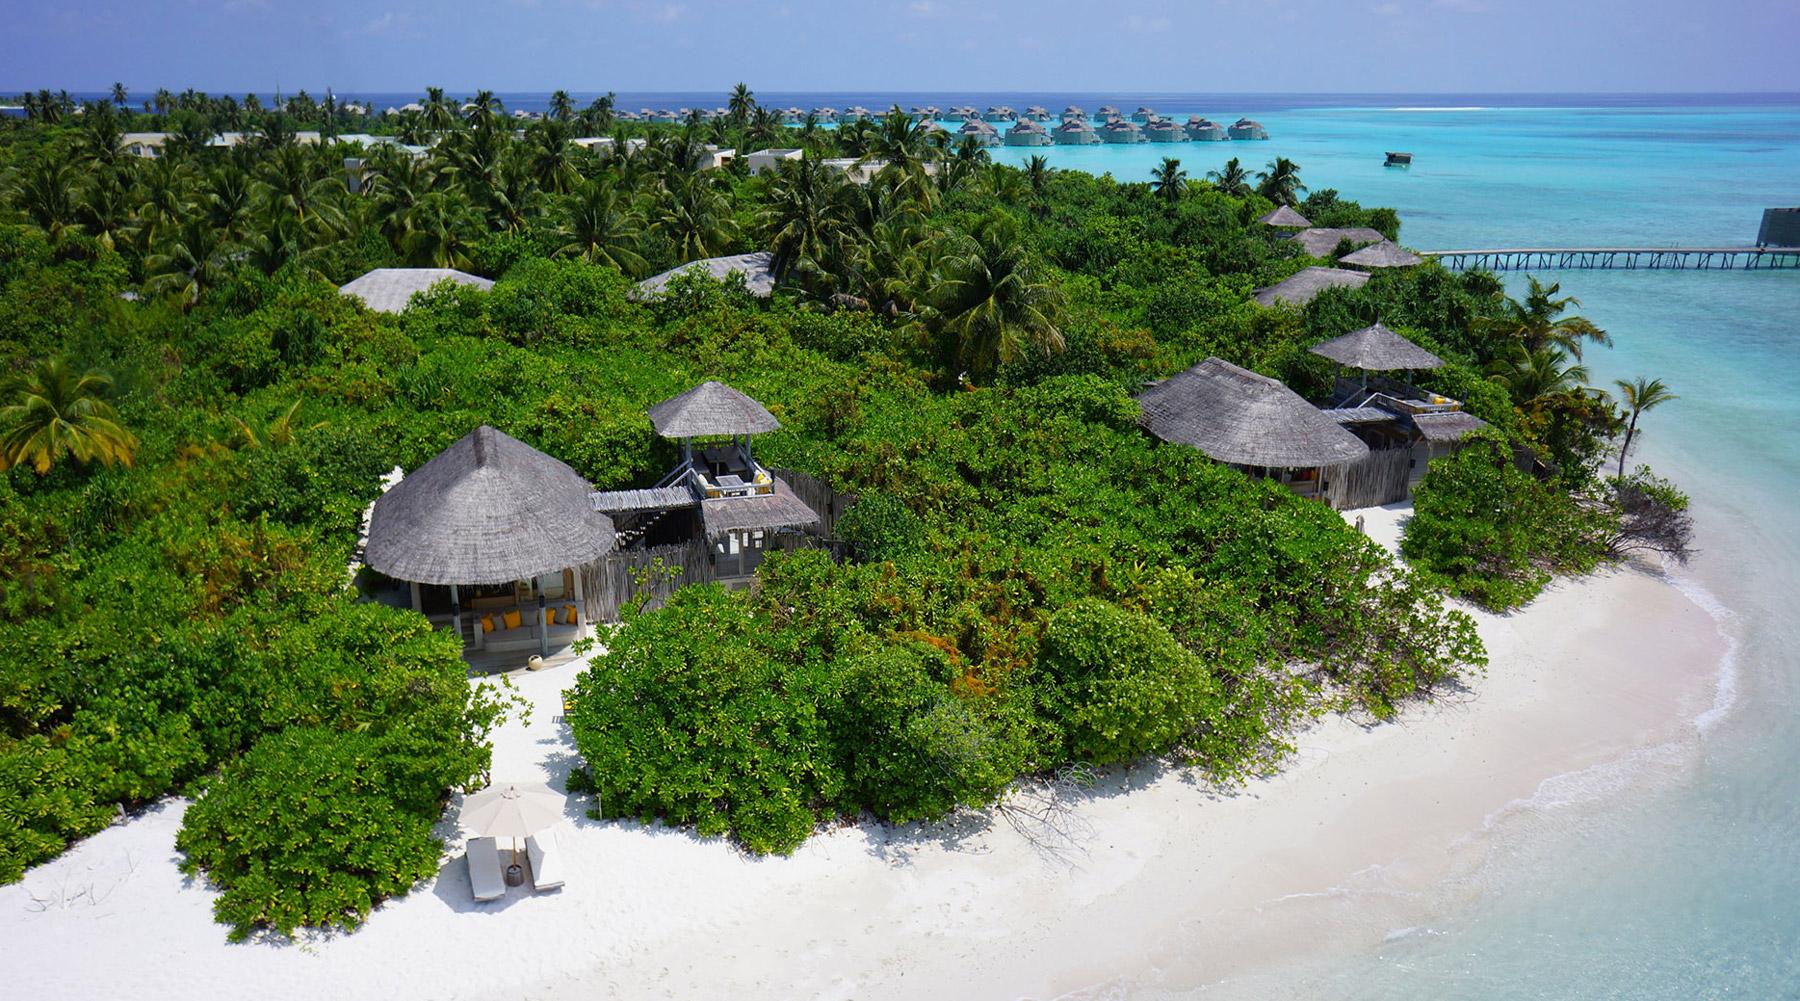 Experiences in the Maldives